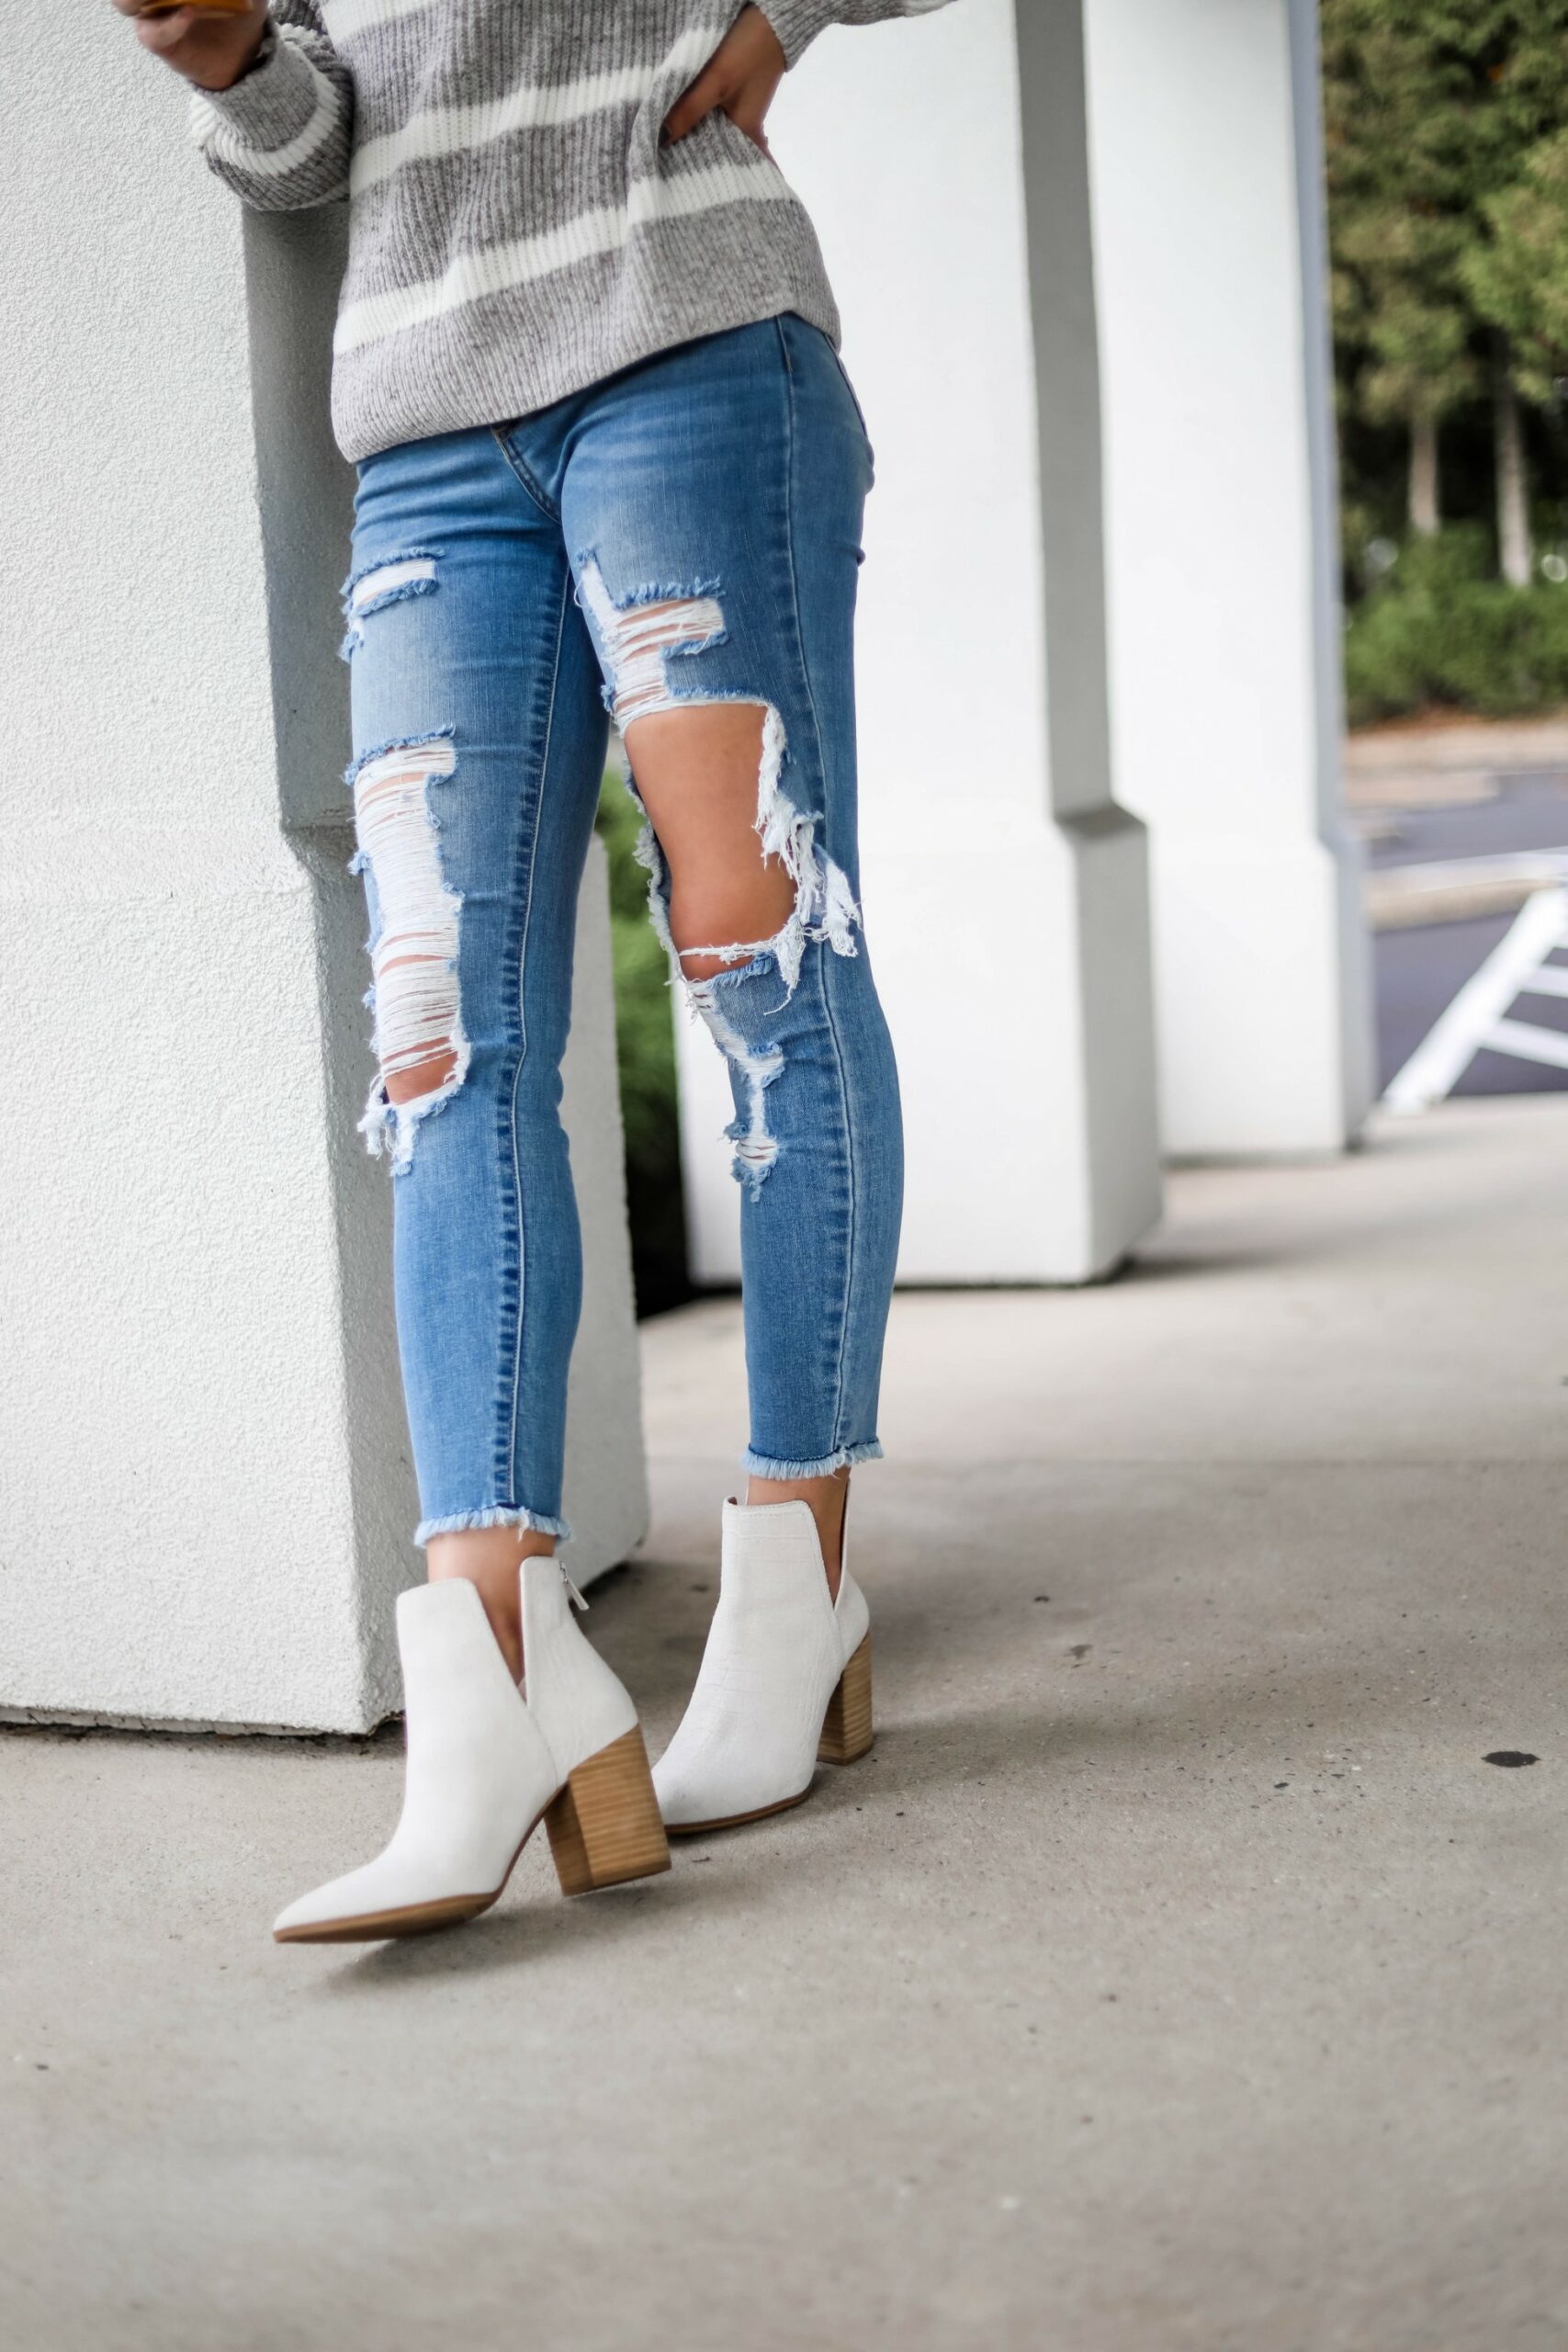 White Steve Madden booties outfit - on Coming Up Roses